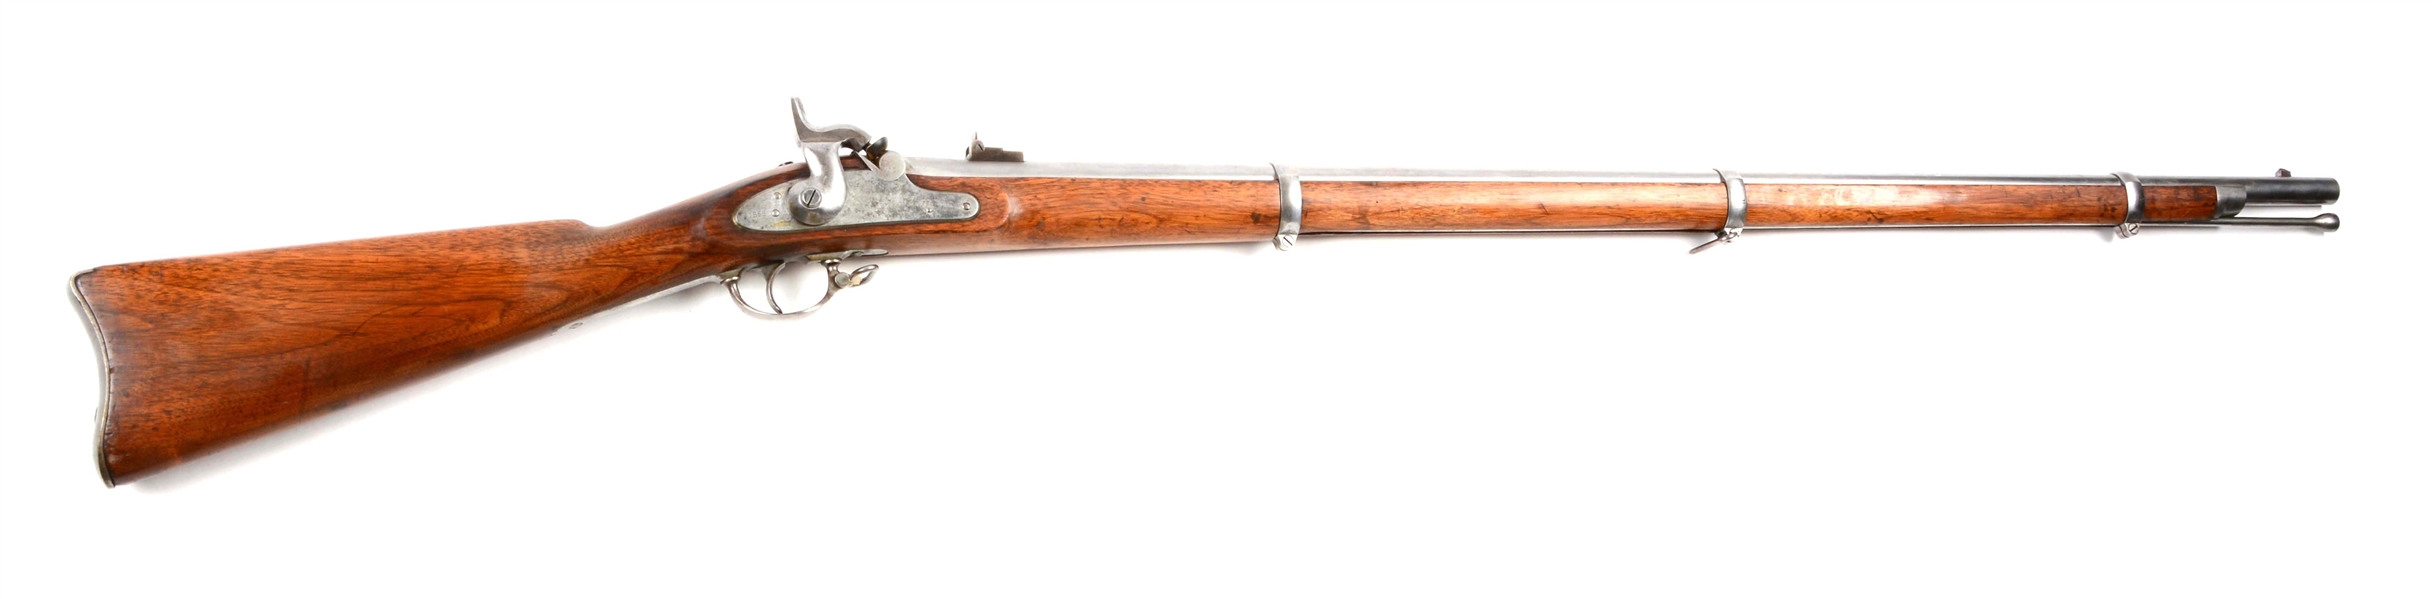 (A) SPECIAL MODEL 1861 CONTRACT RIFLE-MUSKET LAMSON, GOODNOW & YALE CO.